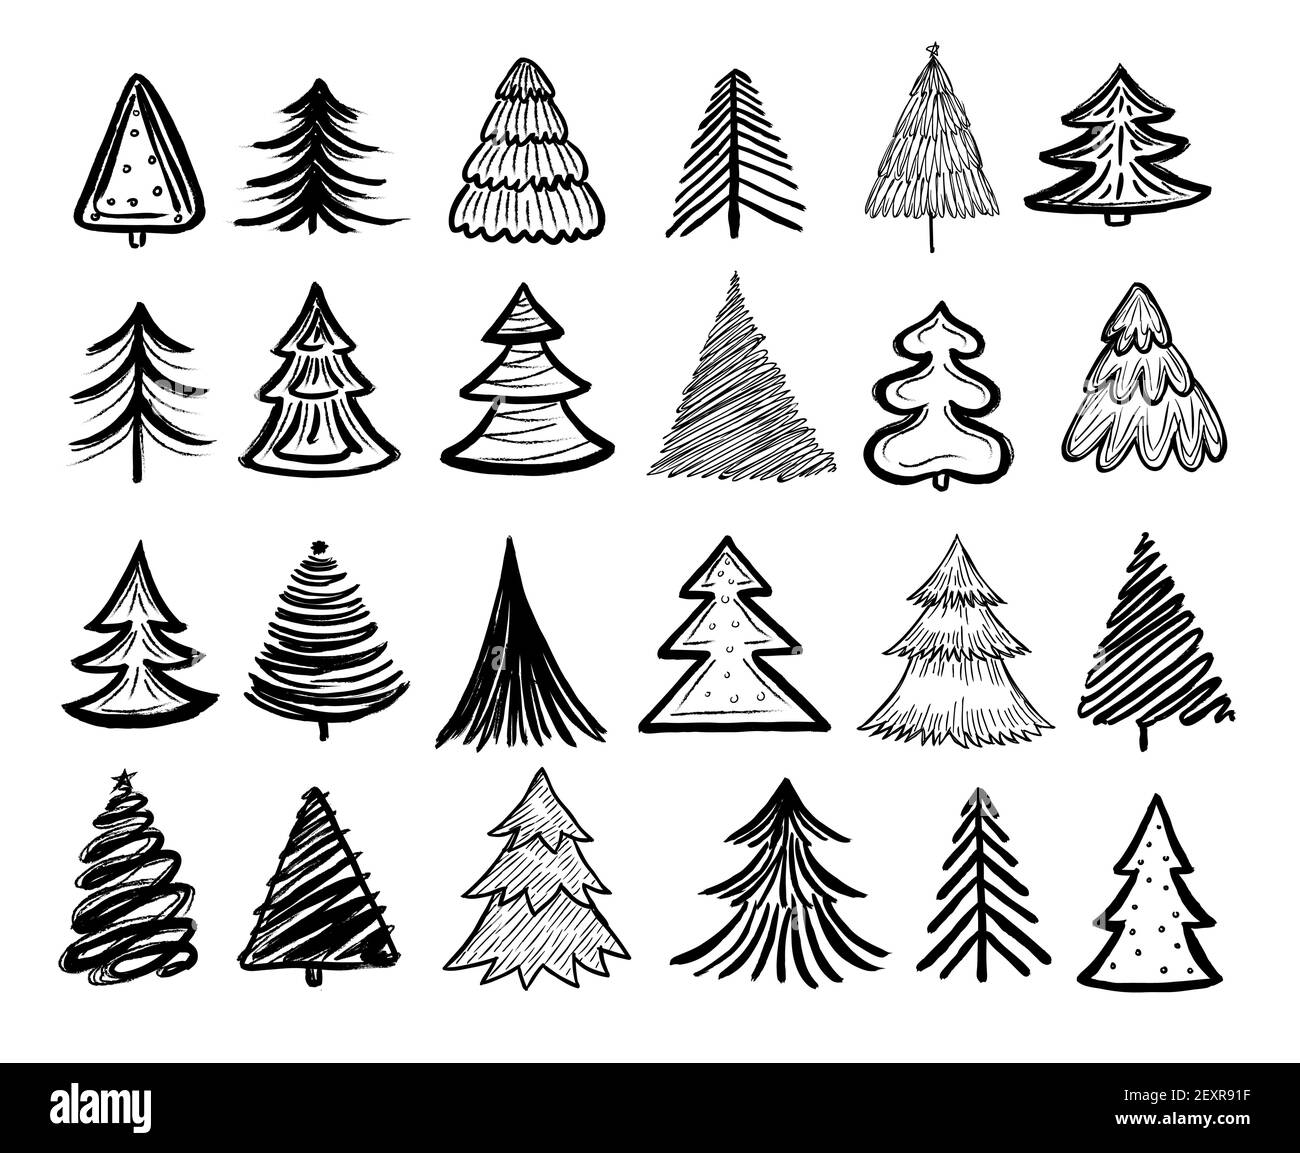 Sketch fir tree. Christmas trees scribble pen drawn holiday decoration. Vintage doodle graphic vector isolated collection. Paintbrush sketch, christmas tree pencil illustration Stock Vector